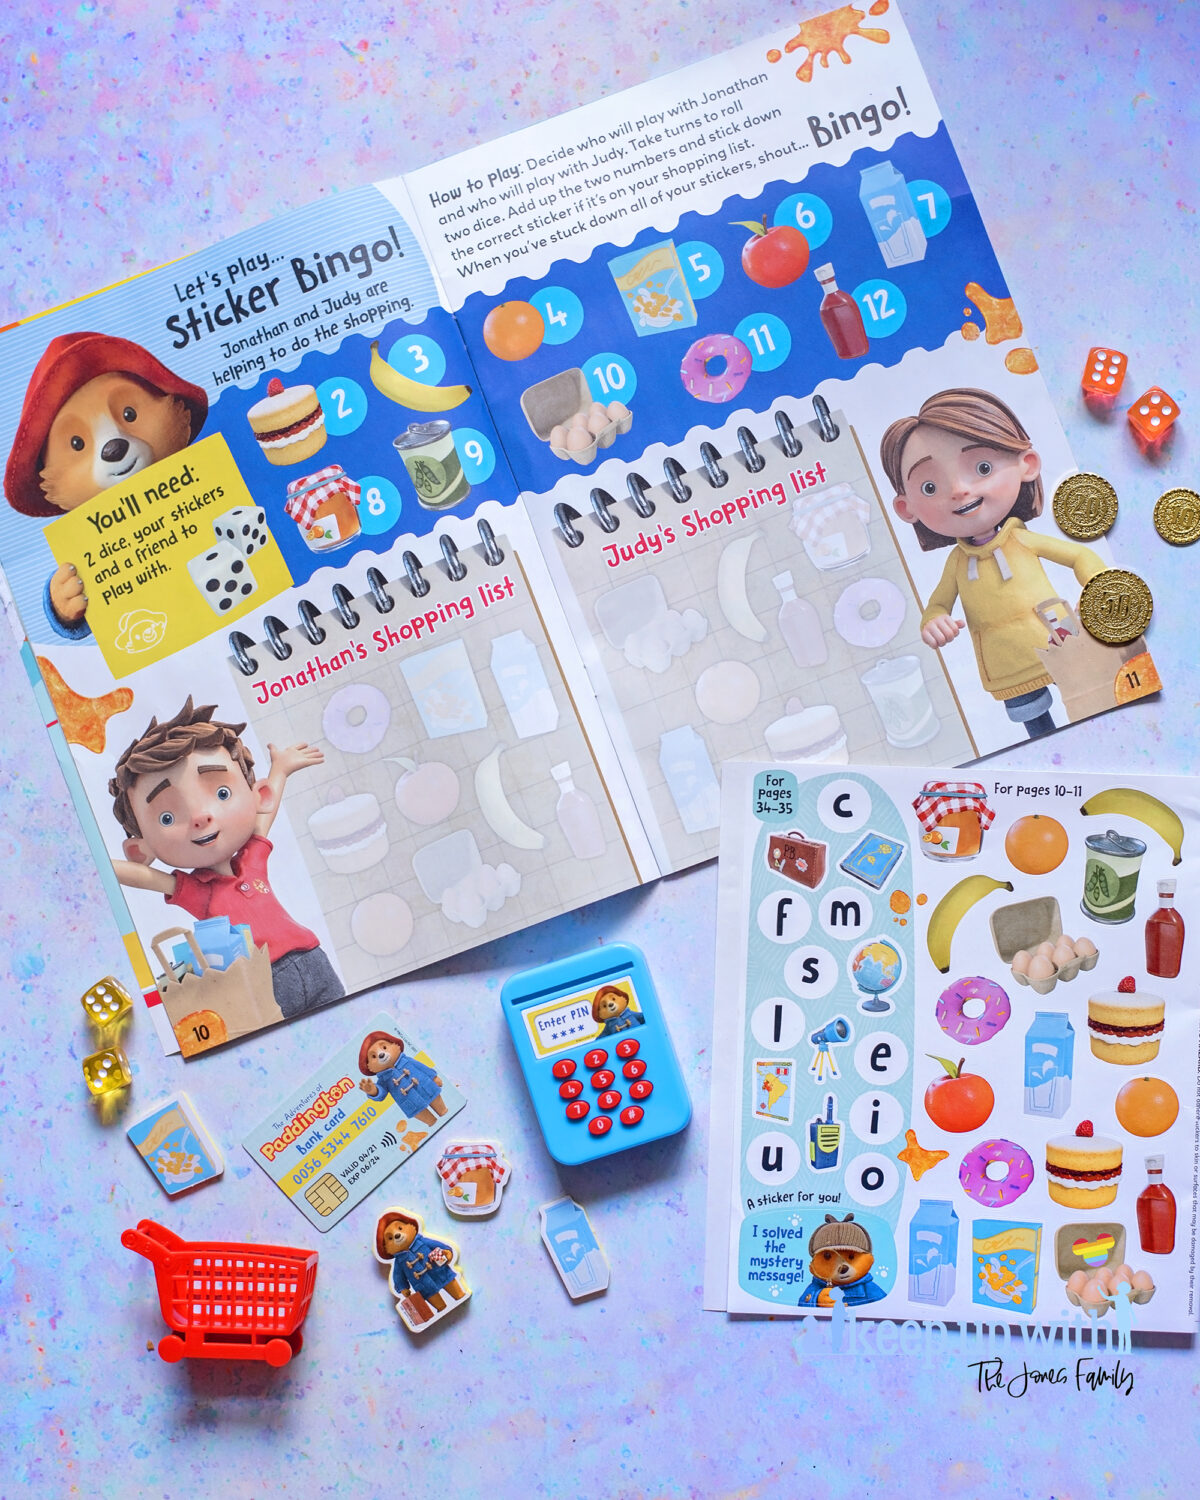 The Adventures of Paddington Bear Magazine EYFS. Photograph shows a spread of the magazine featuring a dice throwing game to calculate the cost of shopping for the under sixes.  There are coloured dice and stickers to help with the activity.